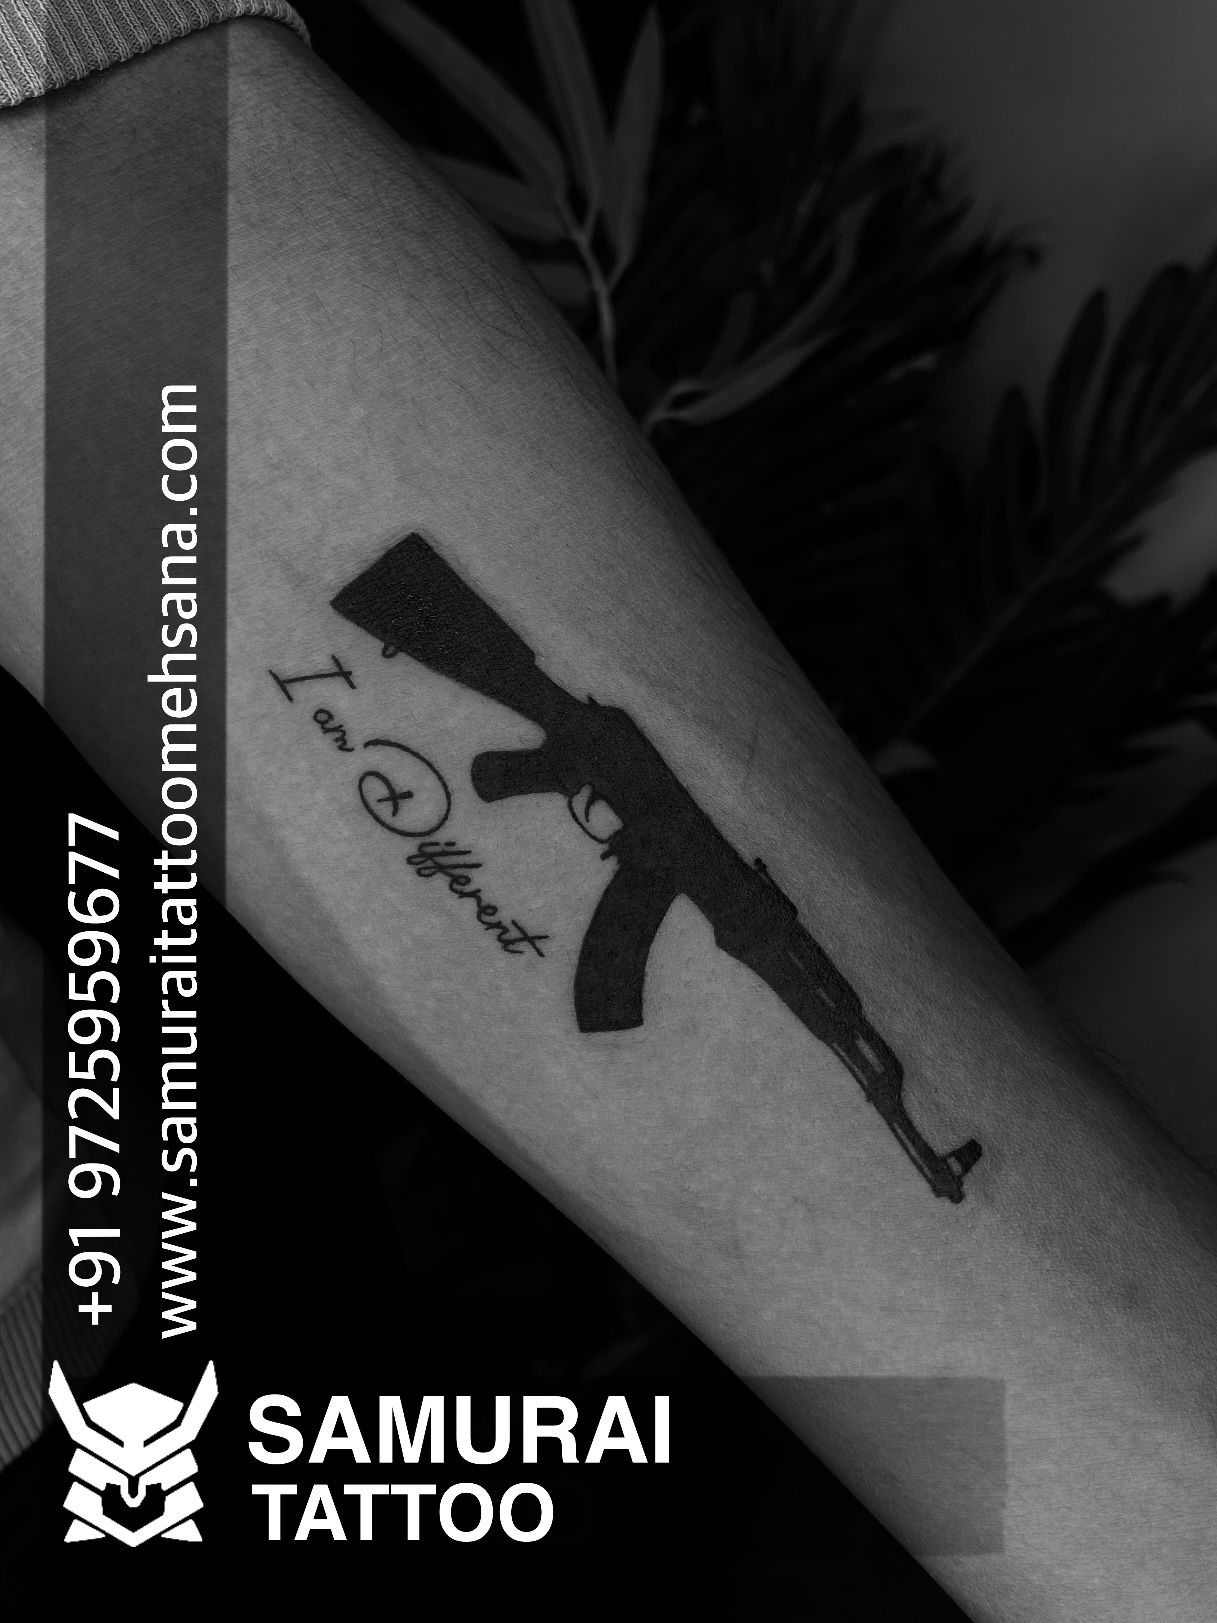 Download Man With Gun Tattoo Arm Picture | Wallpapers.com